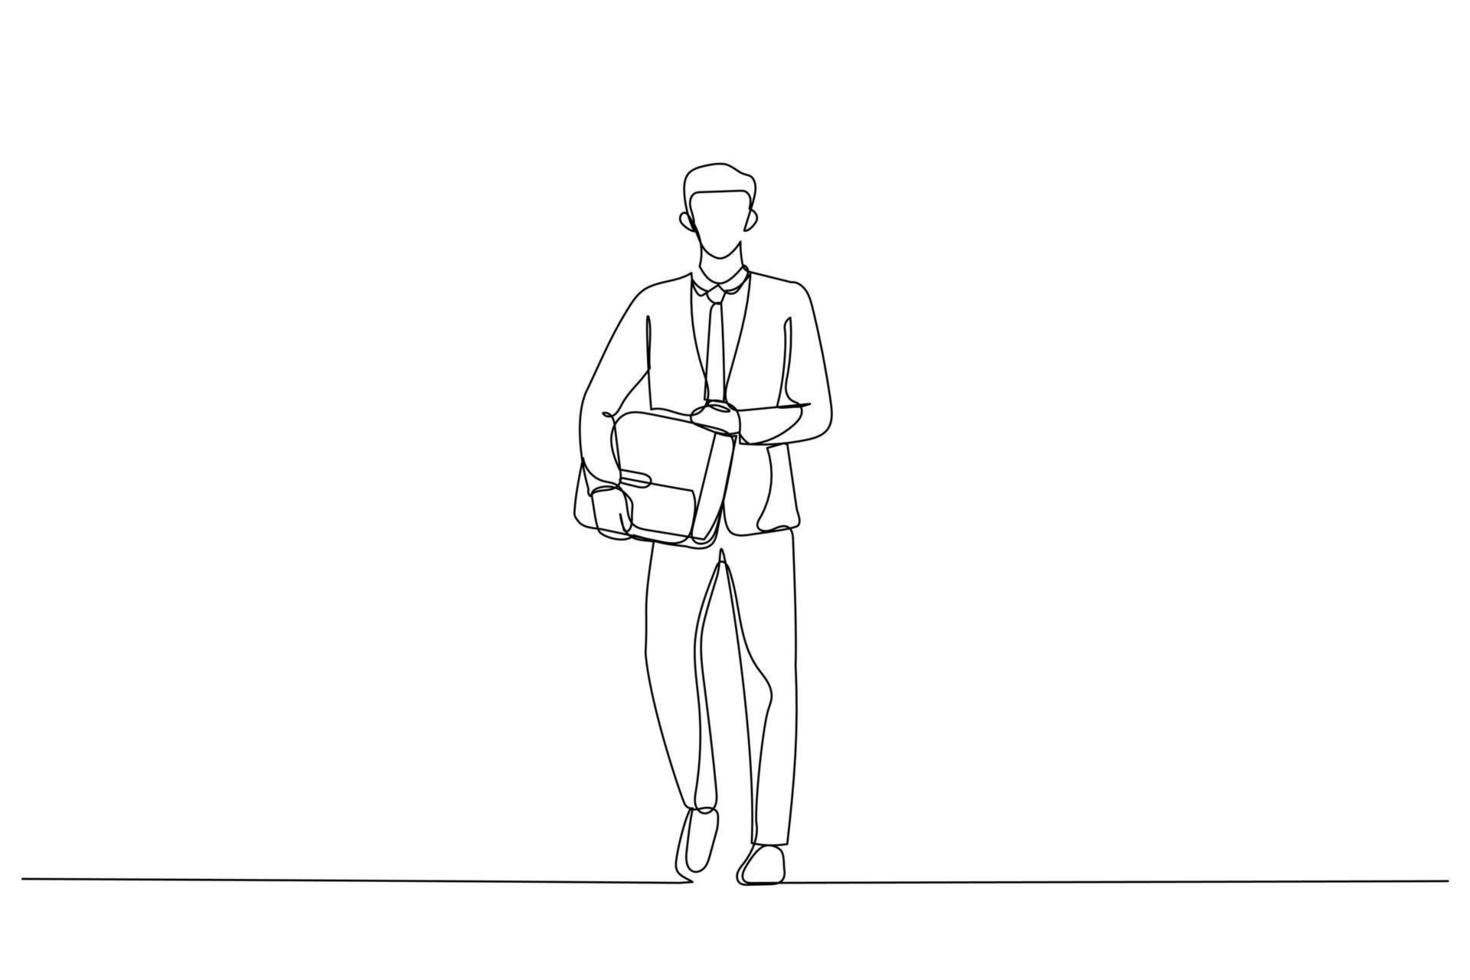 Cartoon of businessman holding suitcase, walking. One line style art vector